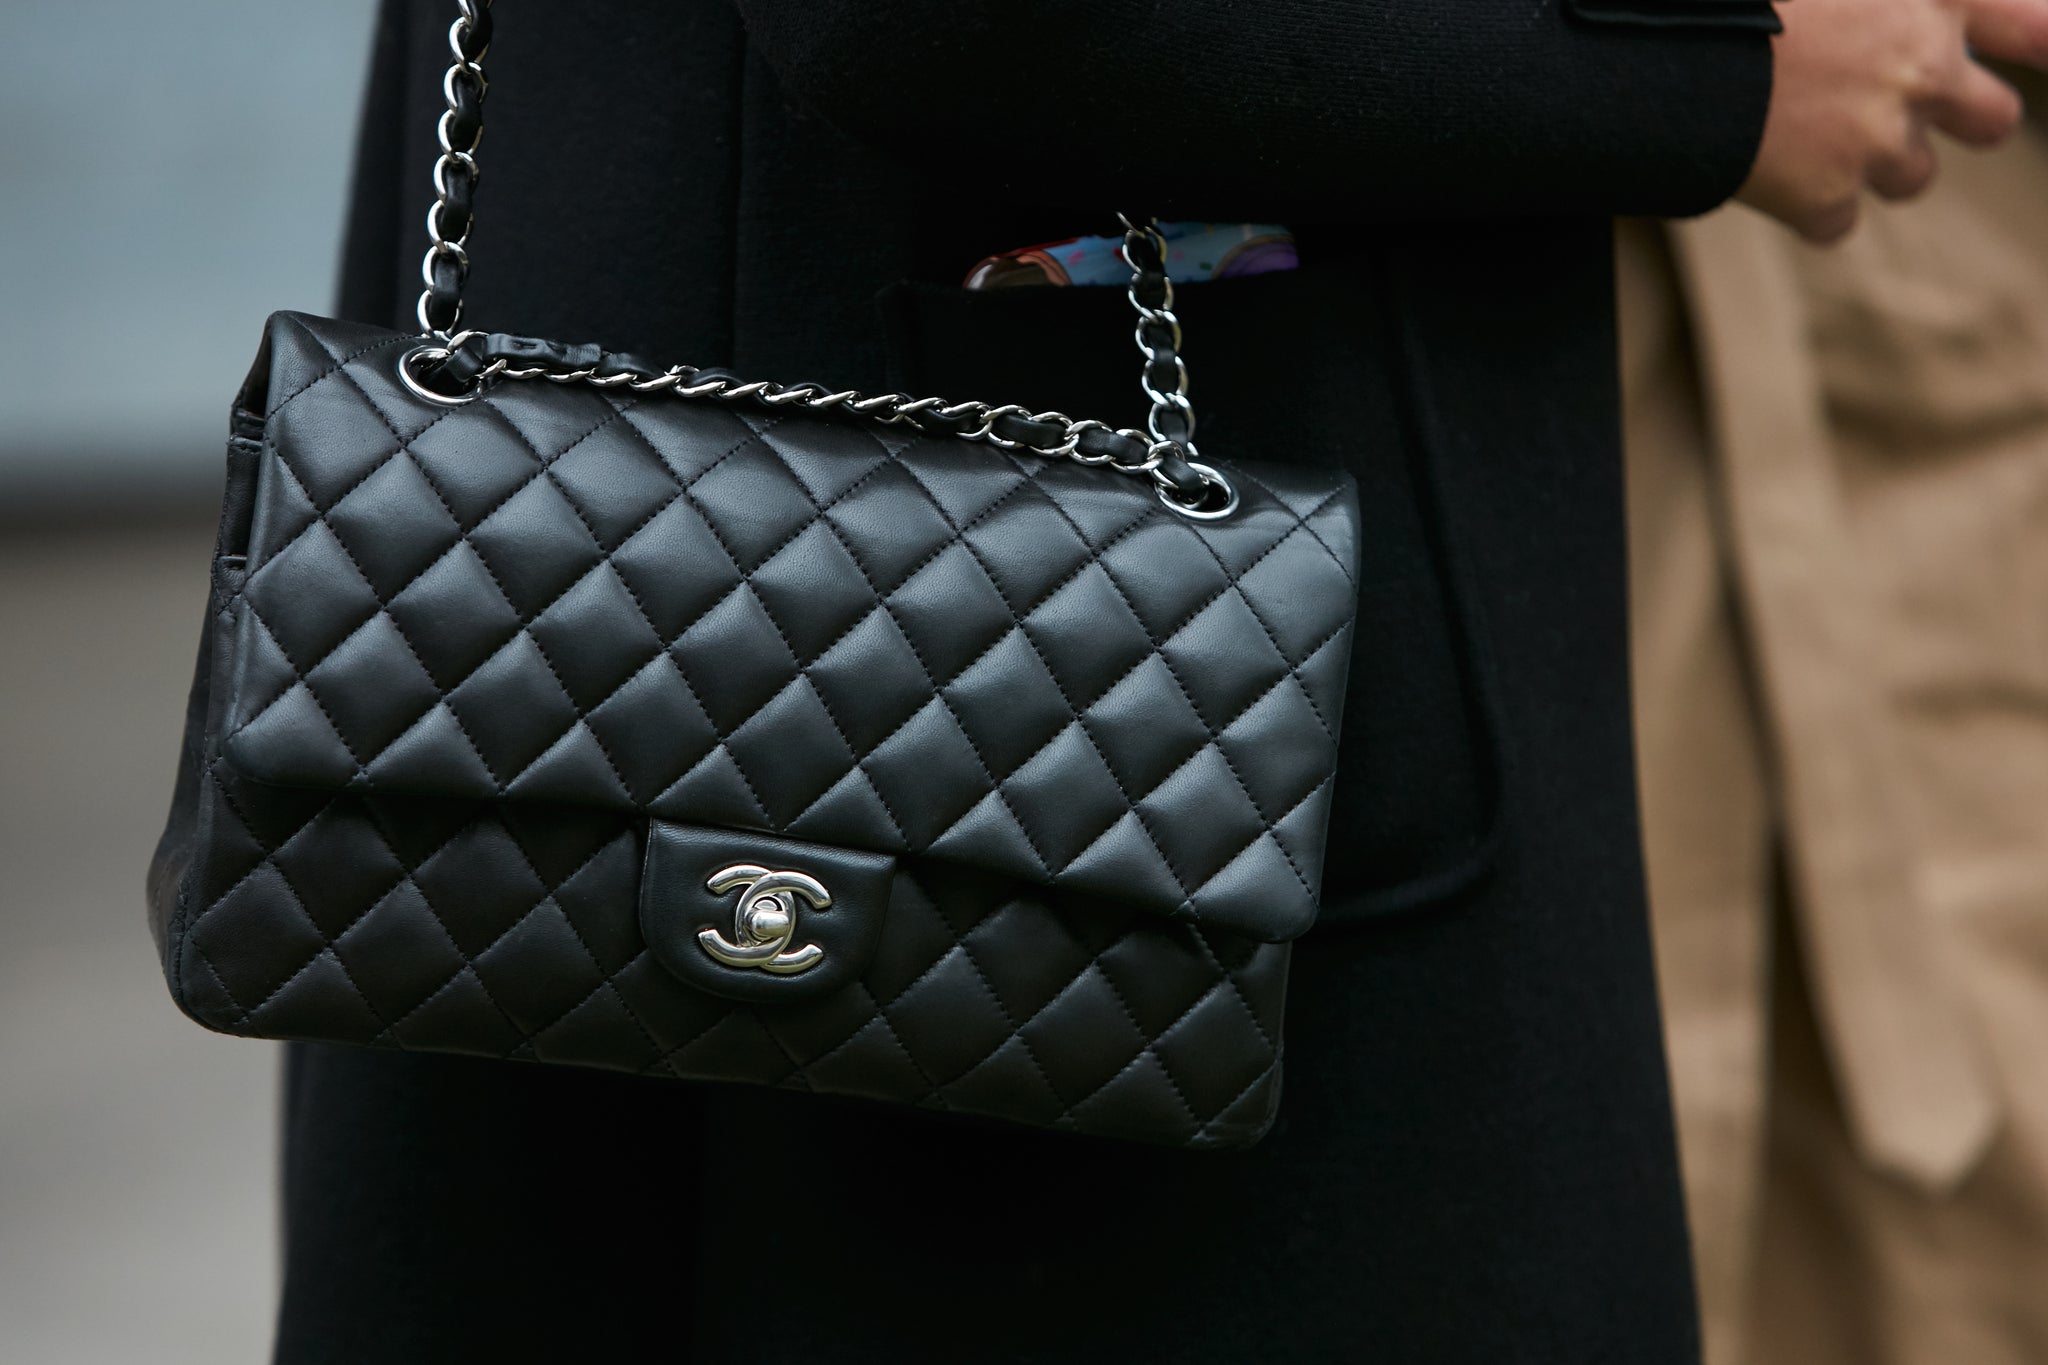 Designer Consignment To Buy Chanel Bag